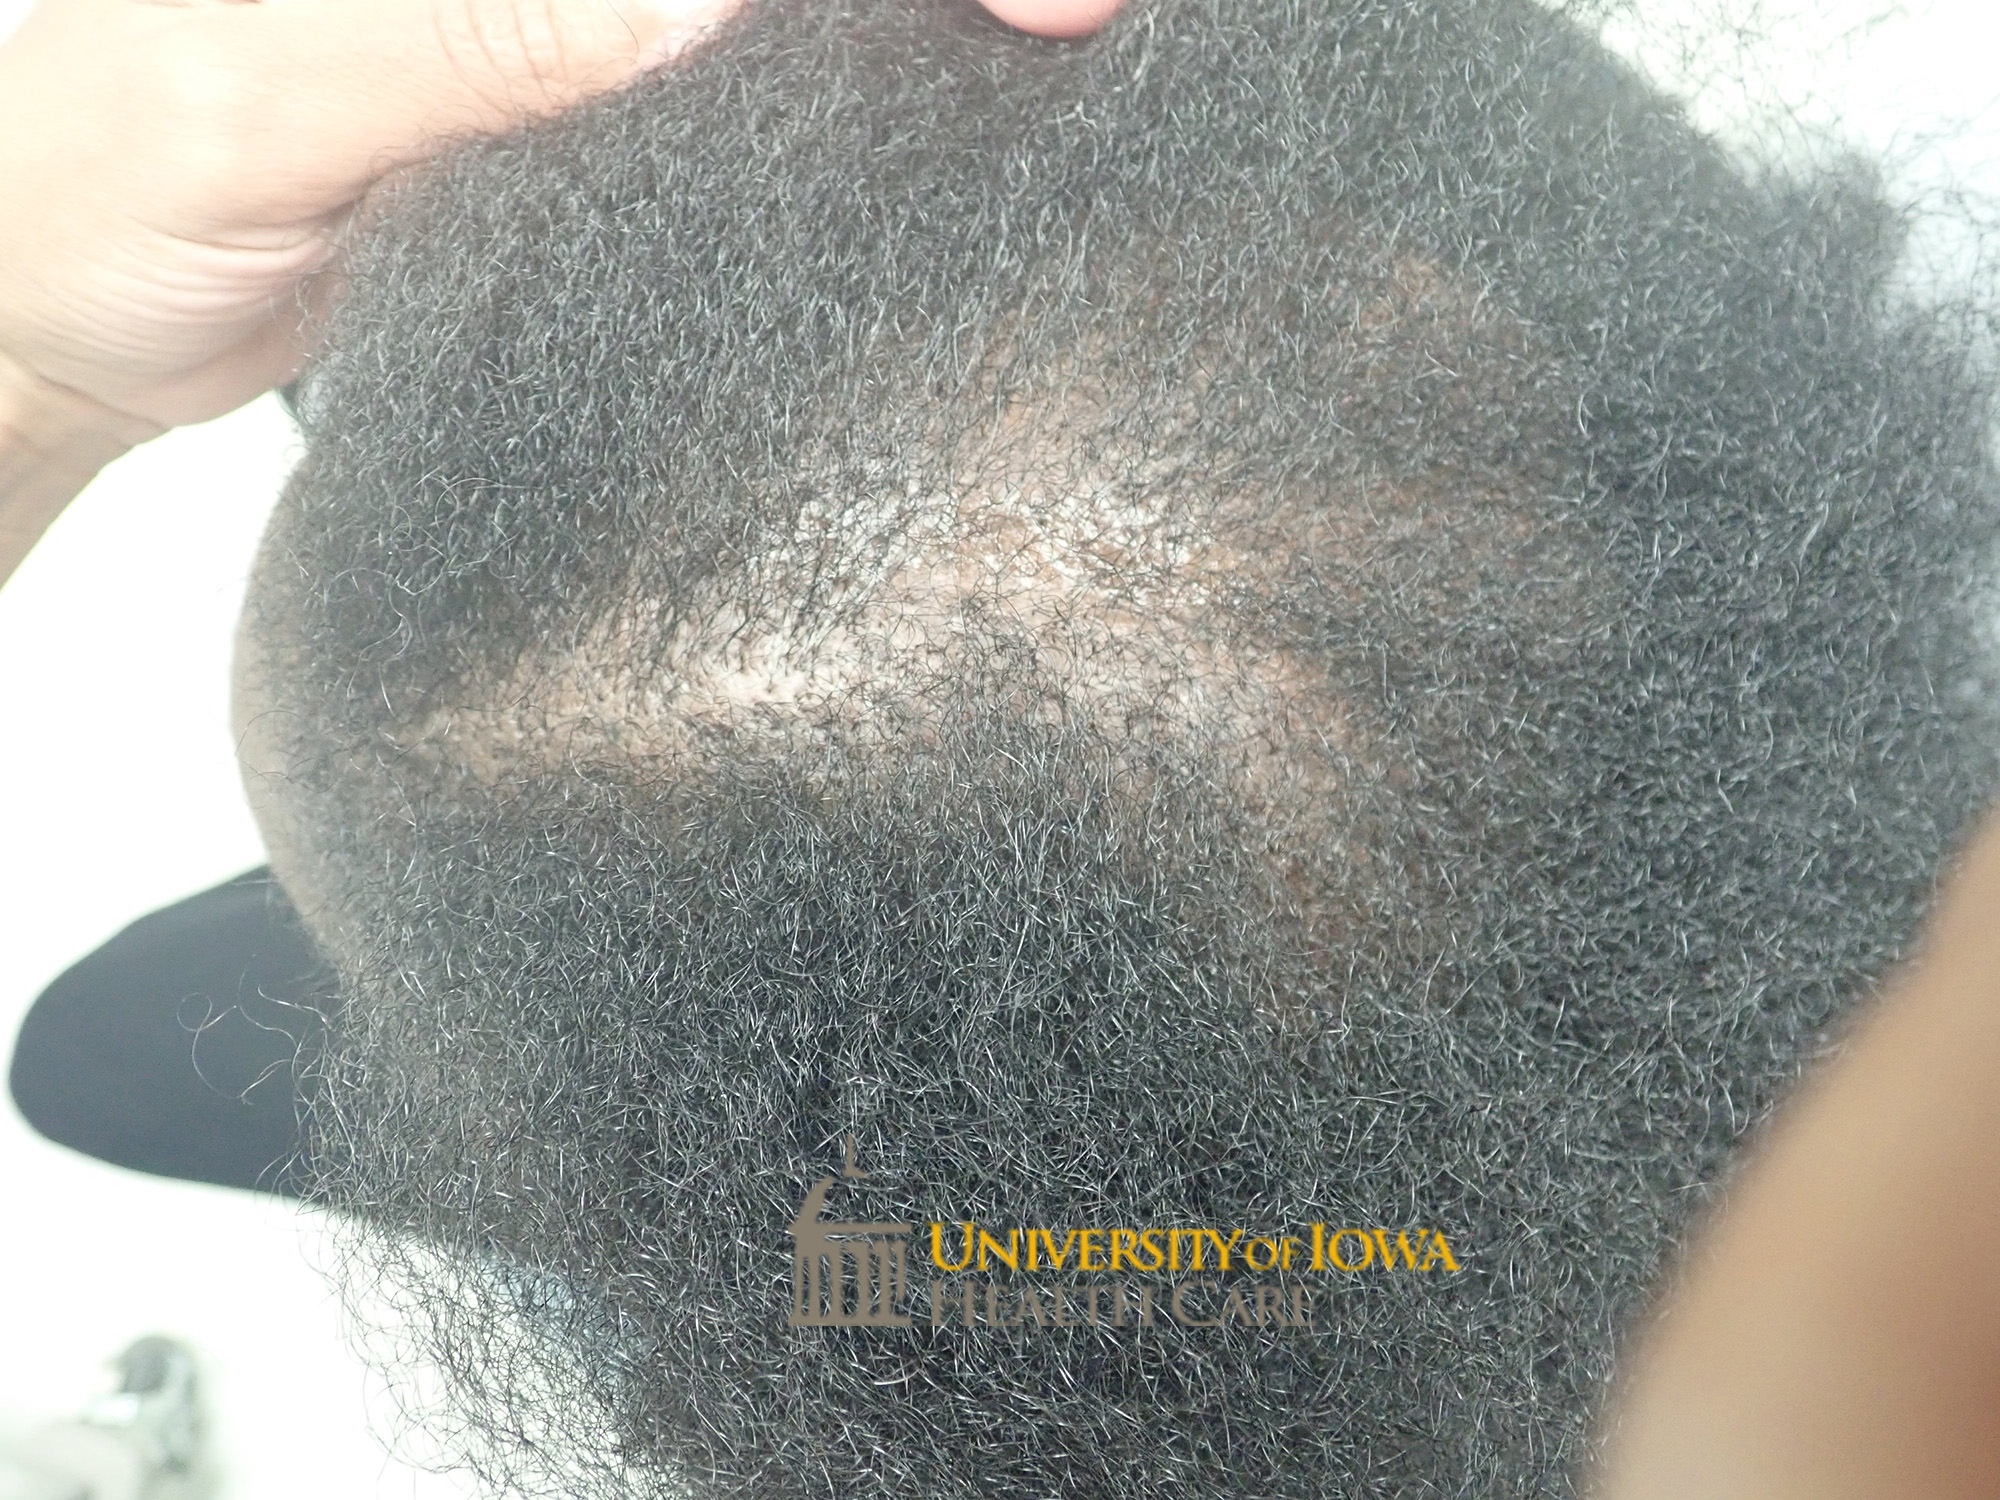 Irregular patch of scarring alopecia with some retained hair follicles on the scalp. (click images for higher resolution).